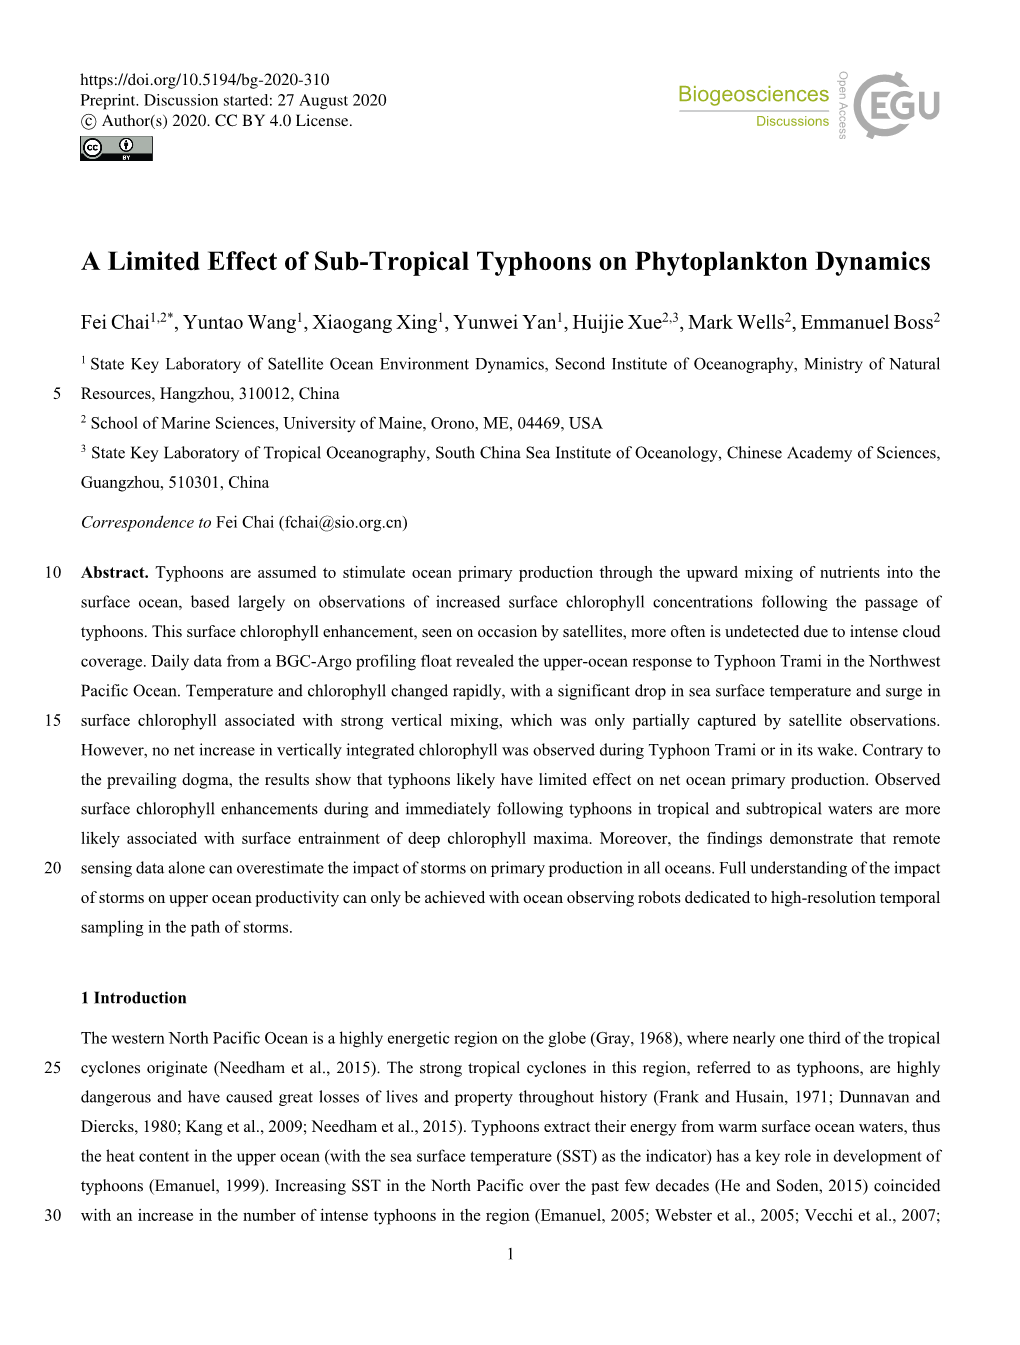 A Limited Effect of Sub-Tropical Typhoons on Phytoplankton Dynamics